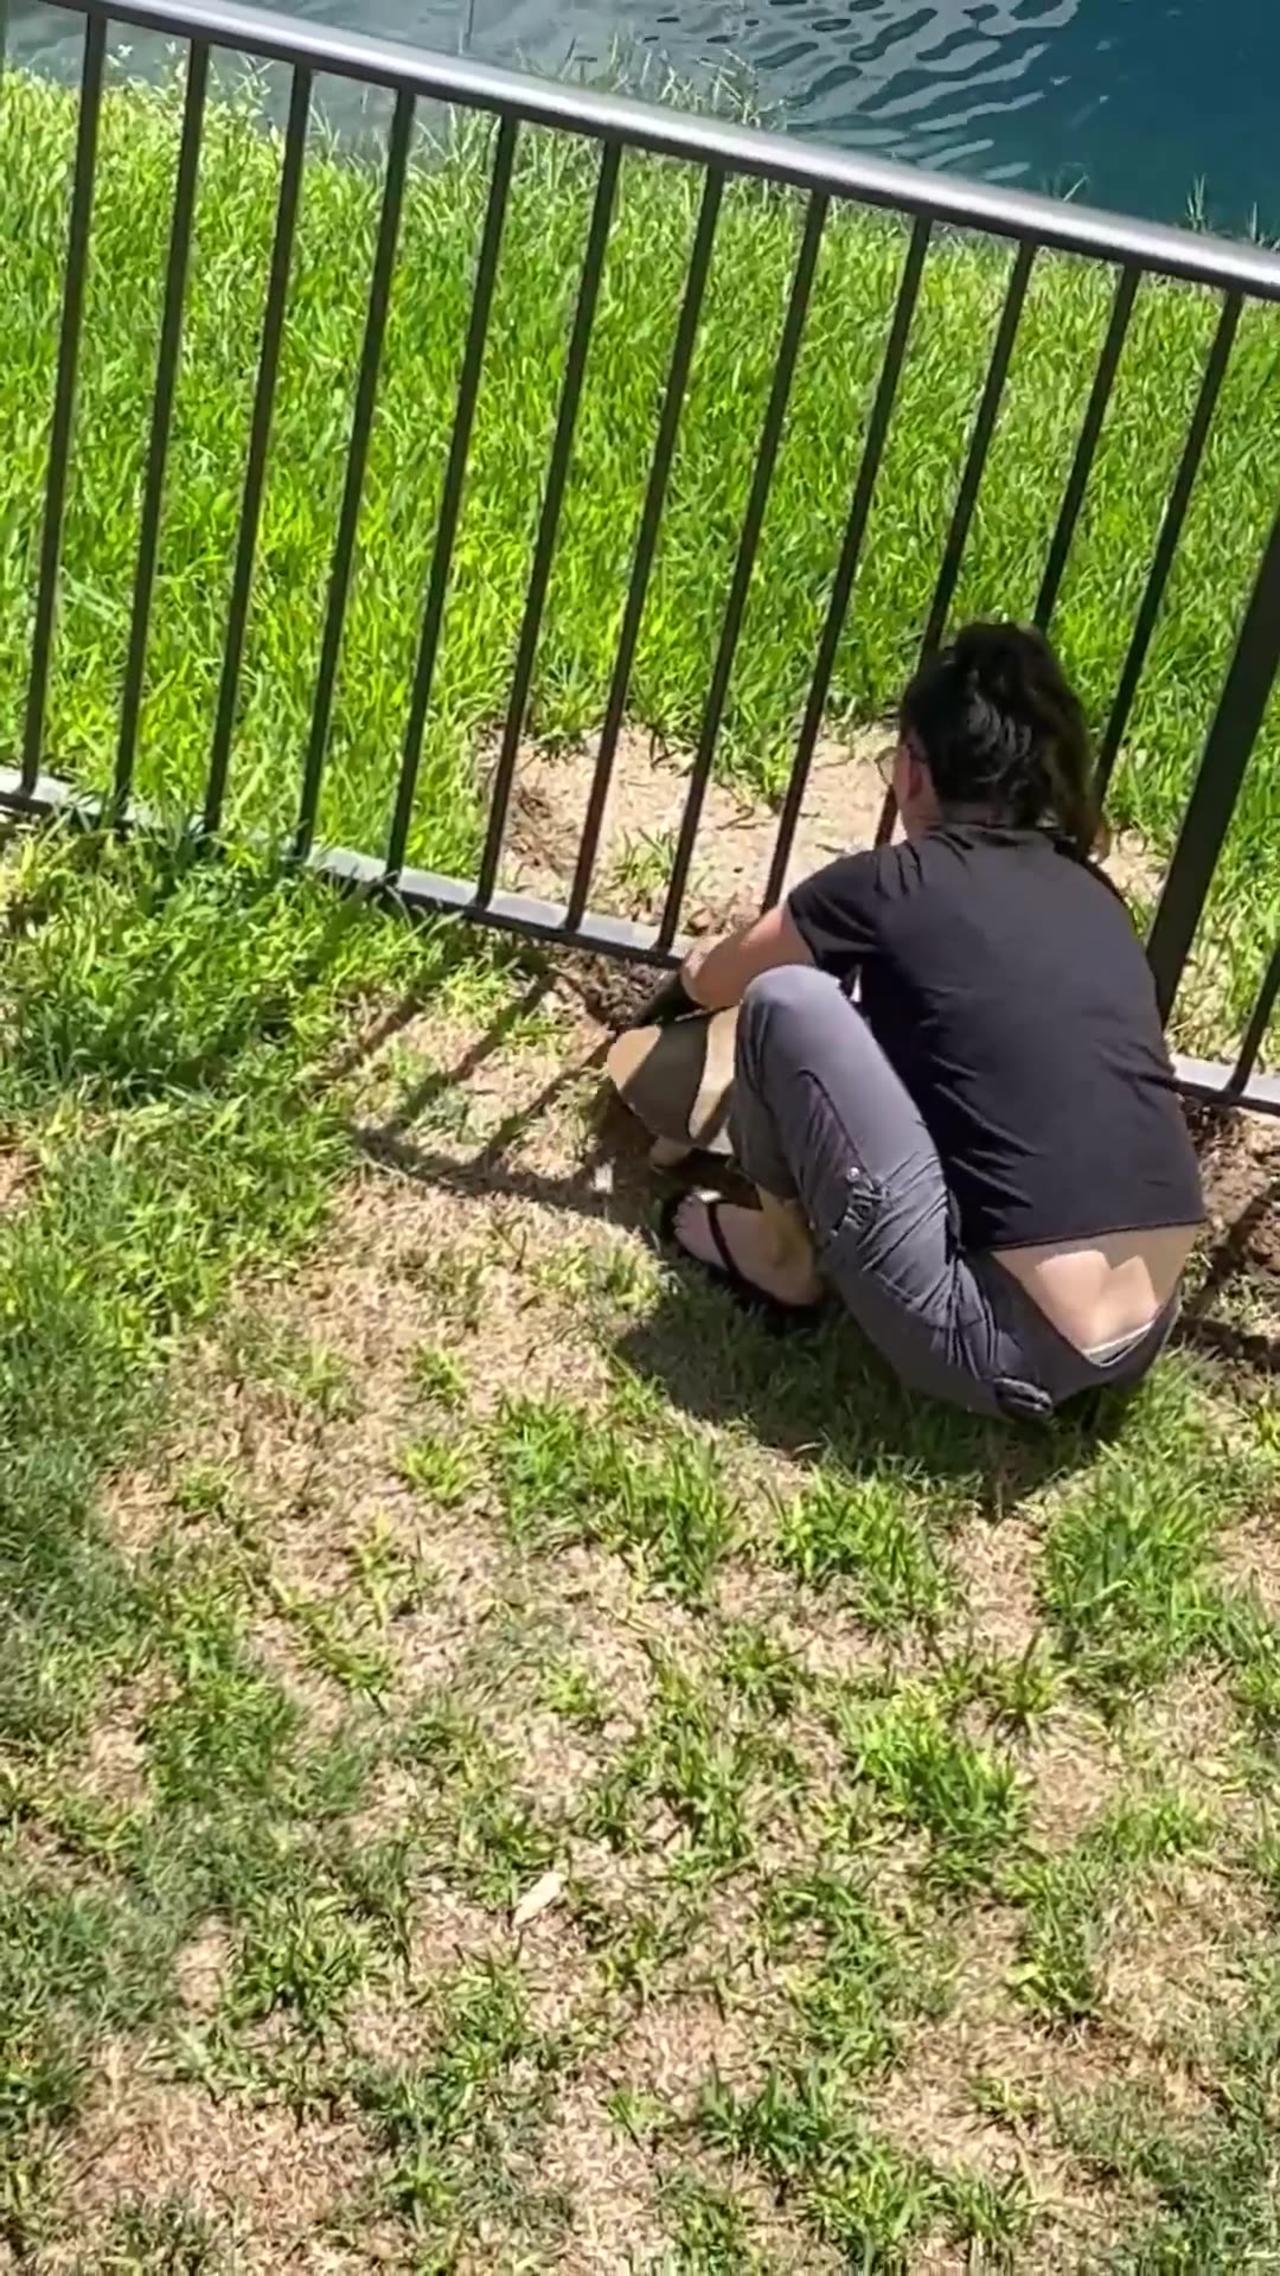 Woman Helps Turtle Stuck on Wrong Side of Fence